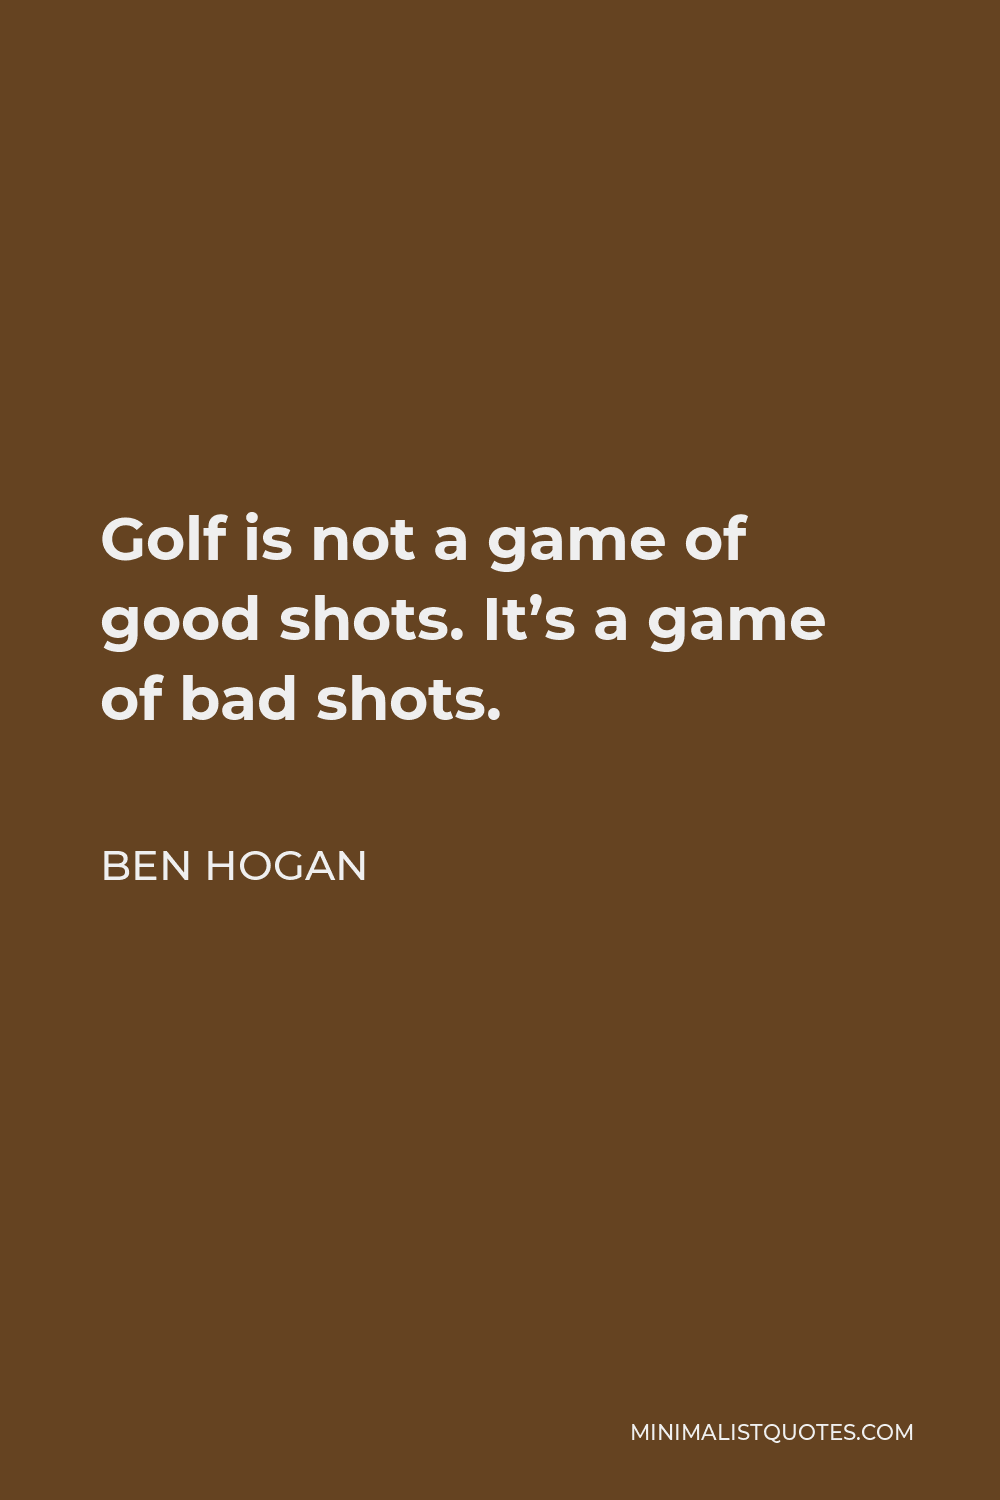 Ben Hogan Quote - Golf is not a game of good shots. It’s a game of bad shots.